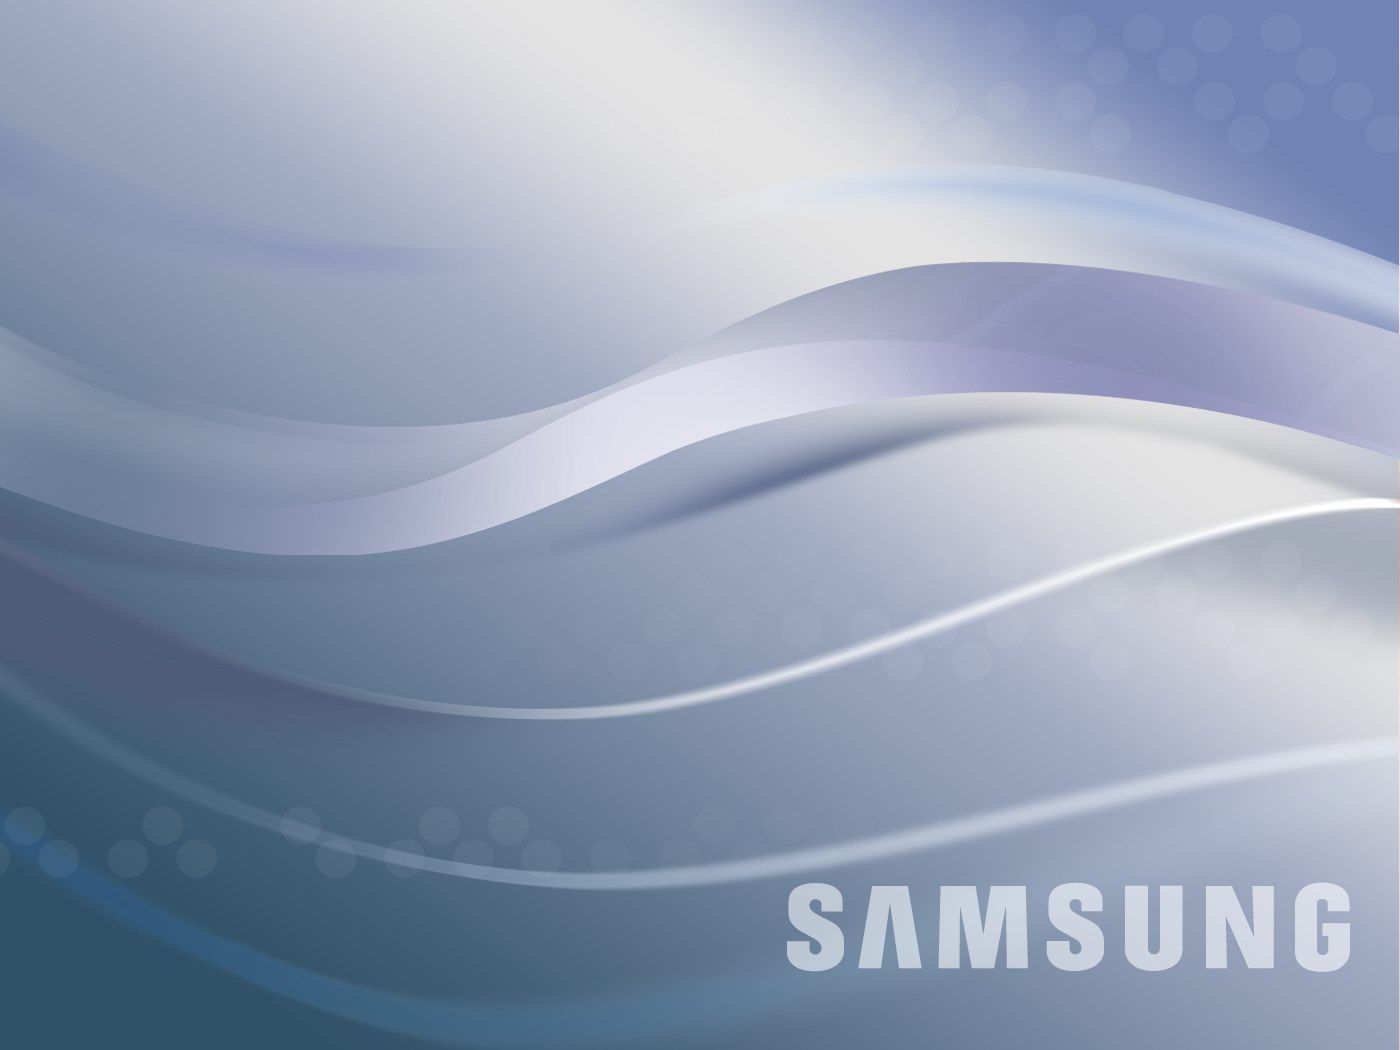 Samsung E2252 Wallpaper Free Download Free HD Backgrounds